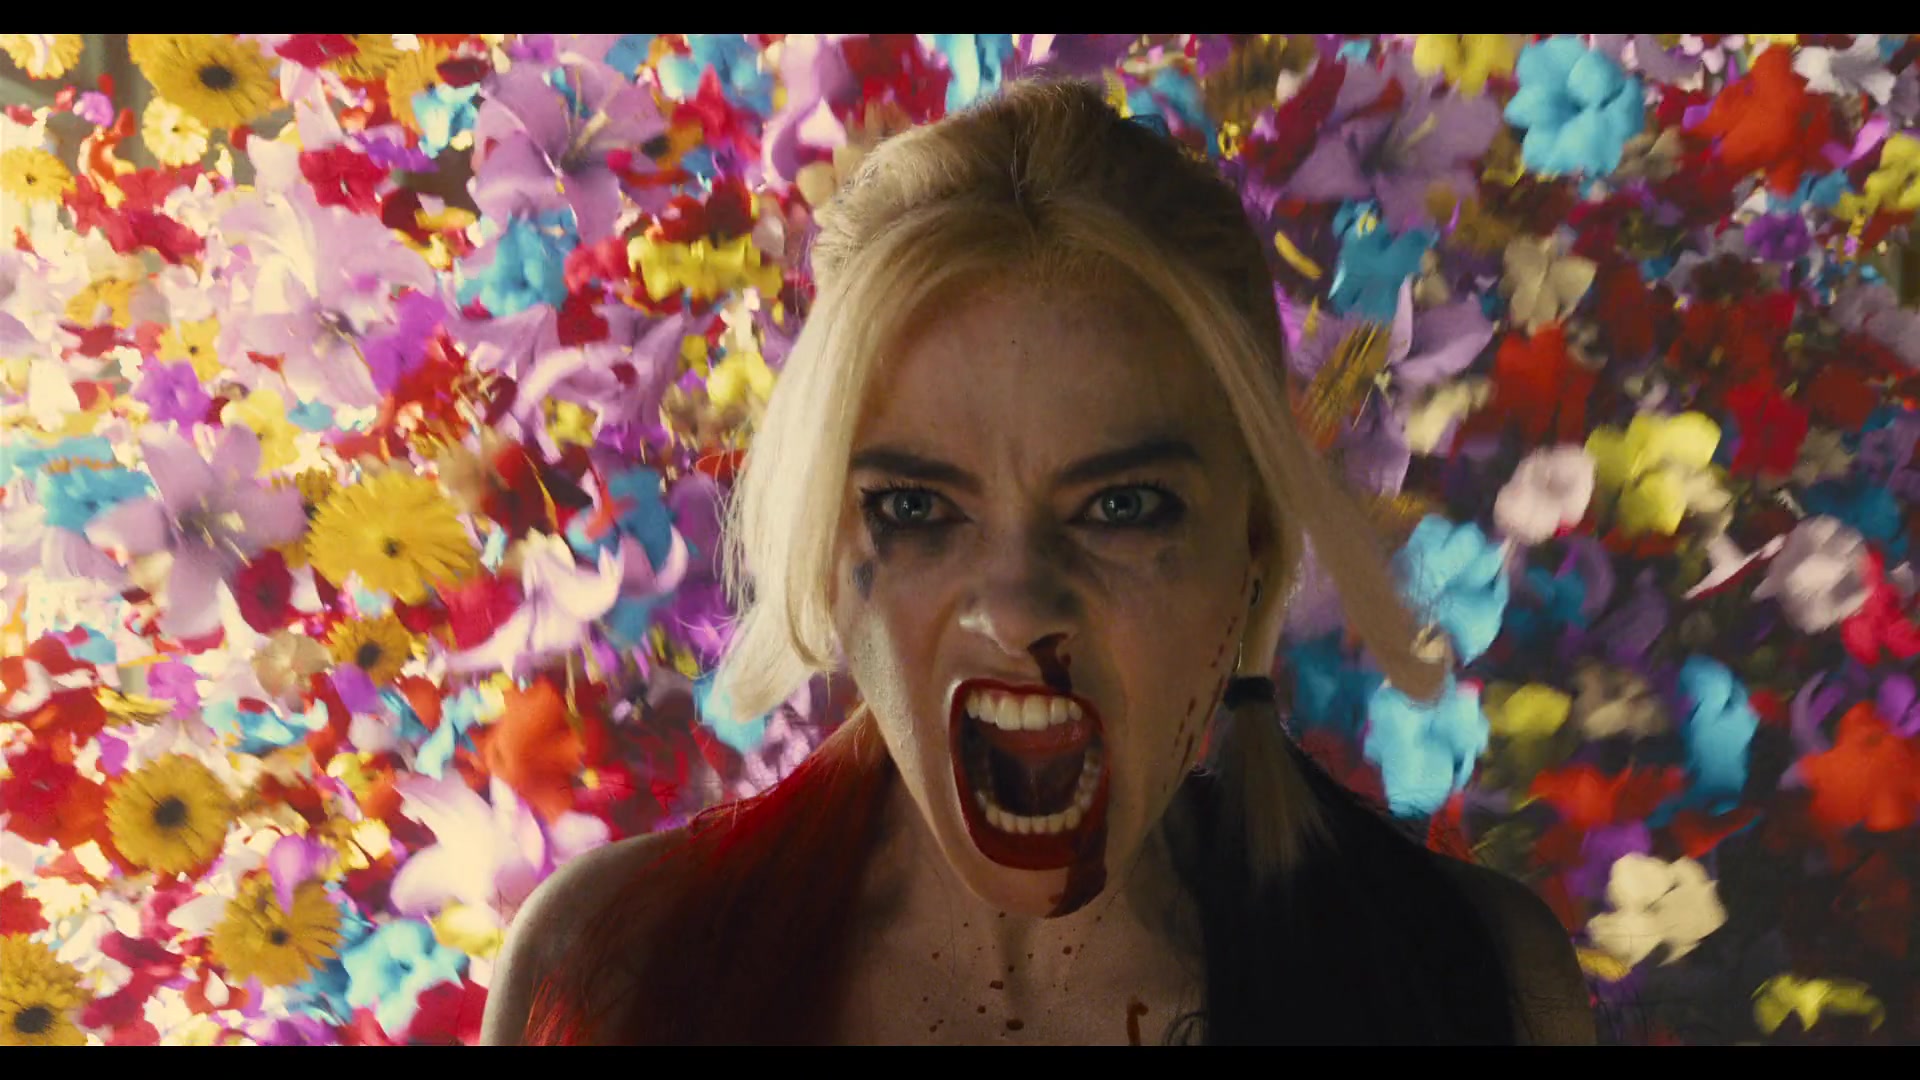 Harley Quinn (Margot Robbie) makes her escape in The Suicide Squad (2021), Warner Bros. Pictures via Blu-ray